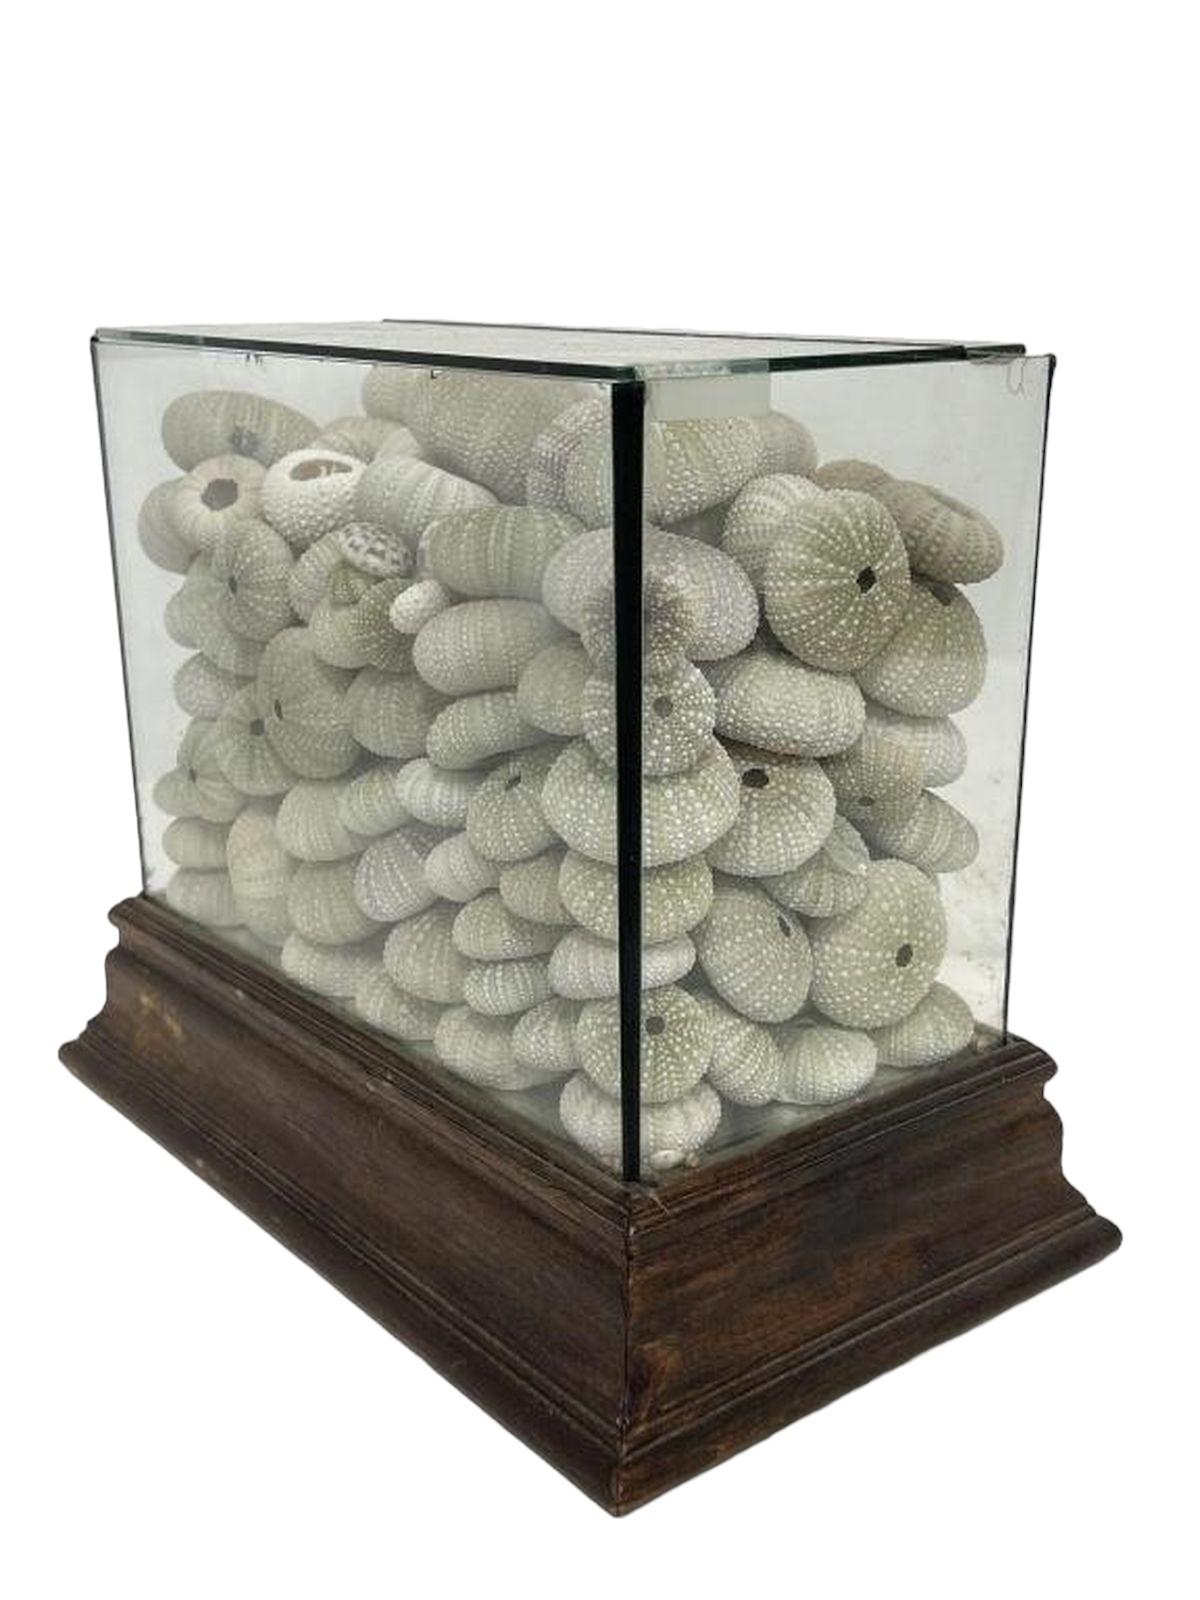 Large Glass Box Display of Sea Urchin Shells 11H In Good Condition For Sale In Pasadena, CA